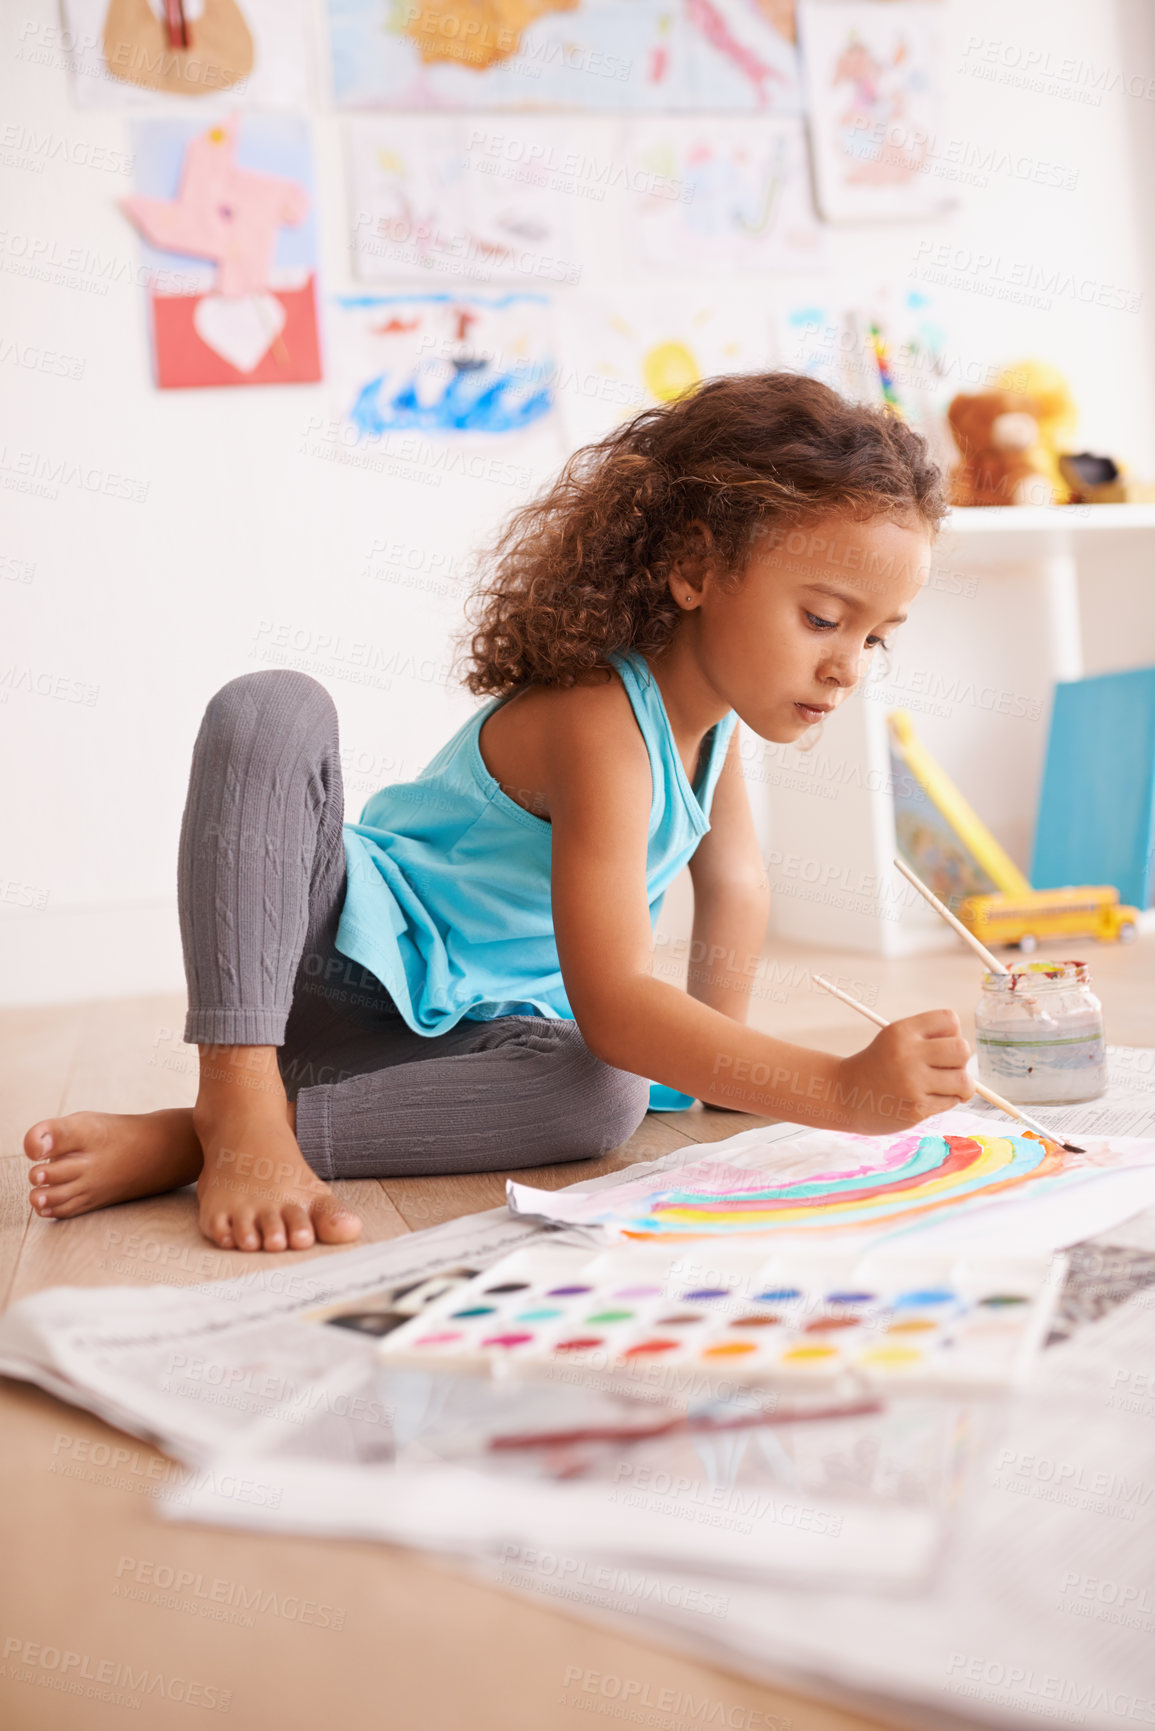 Buy stock photo Kindergarten, education or girl painting a rainbow on classroom floor for creative, learning or child development. Paper, color splash or sweet kid with school art paint, sketch or having fun drawing